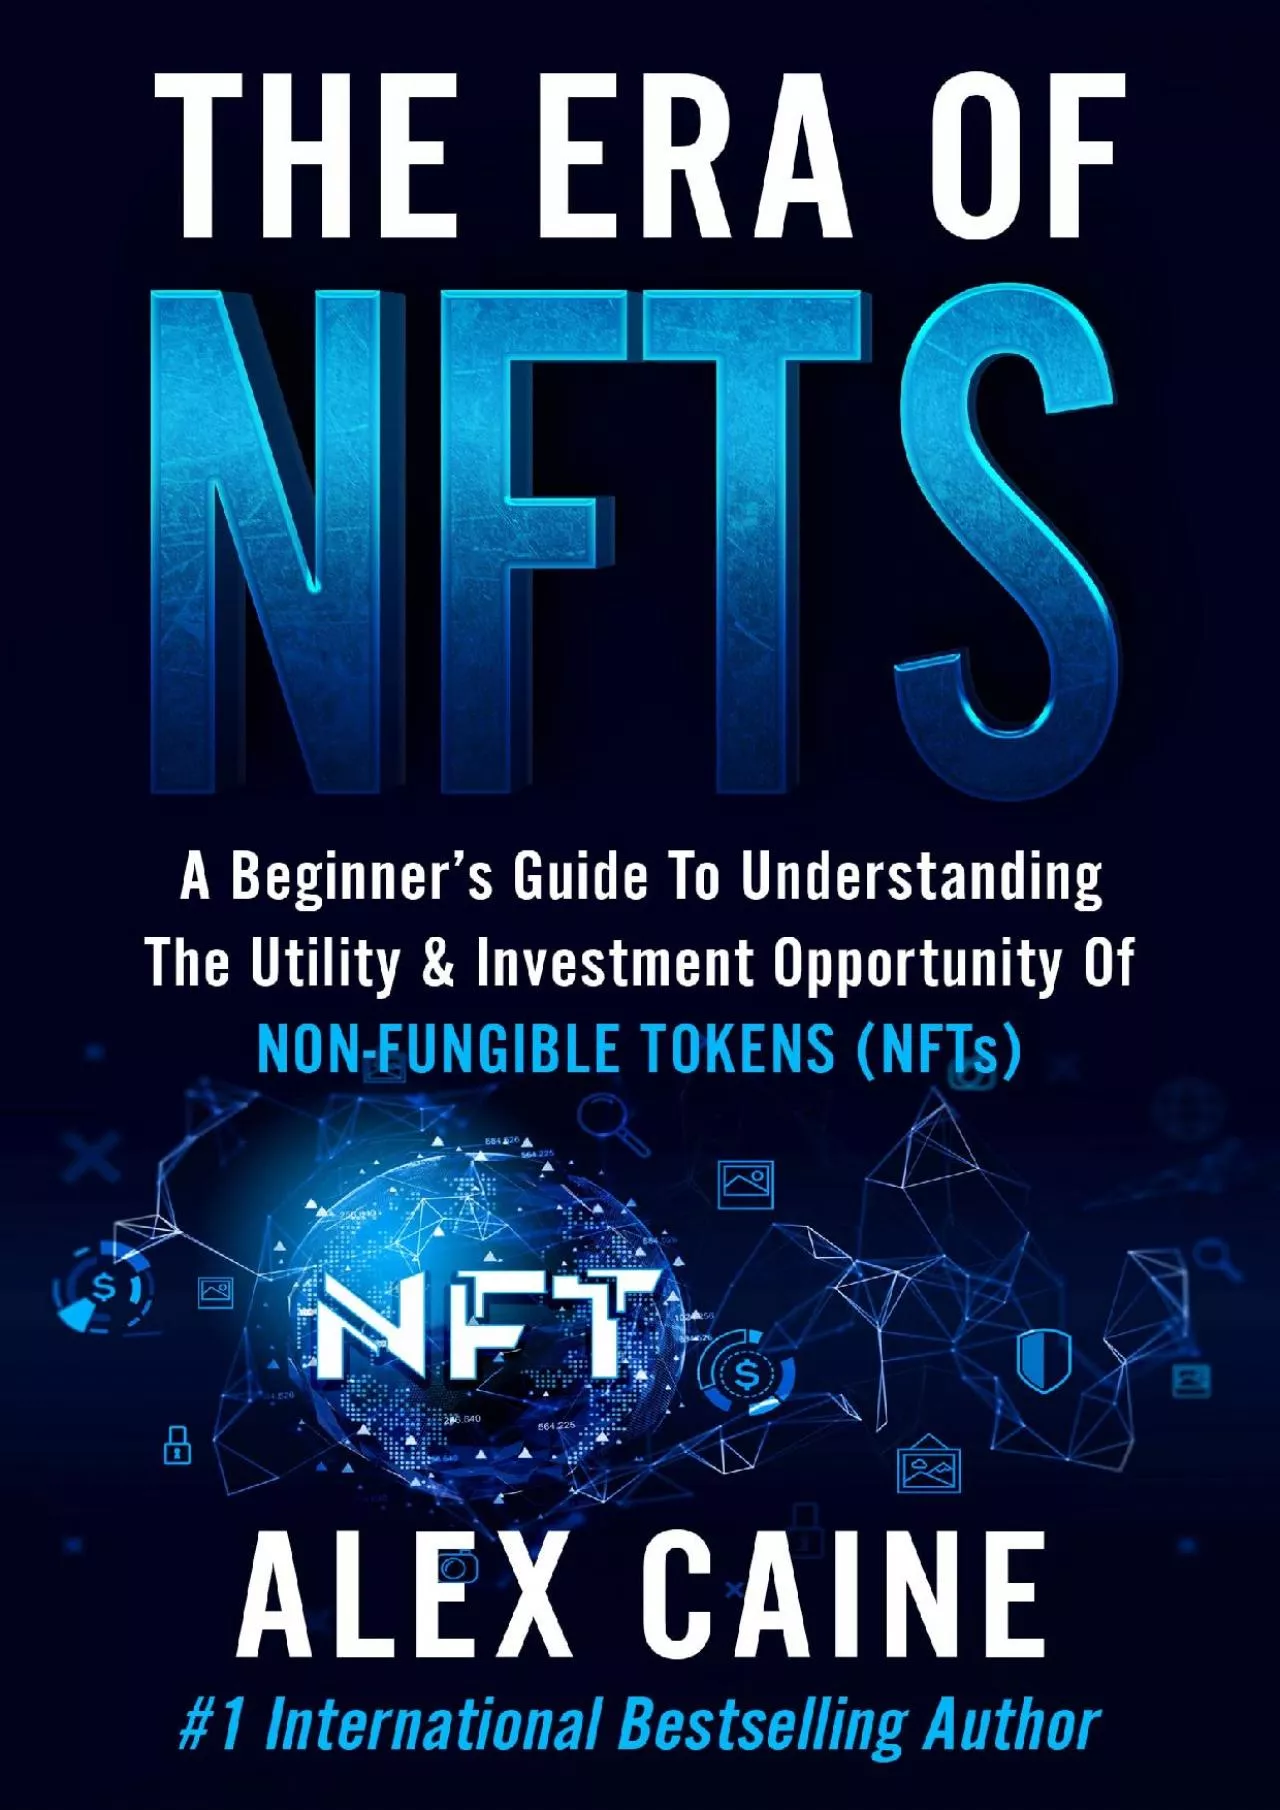 (EBOOK)-The Era of NFTs: A Beginner’s Guide To Understanding The Utility  Investment